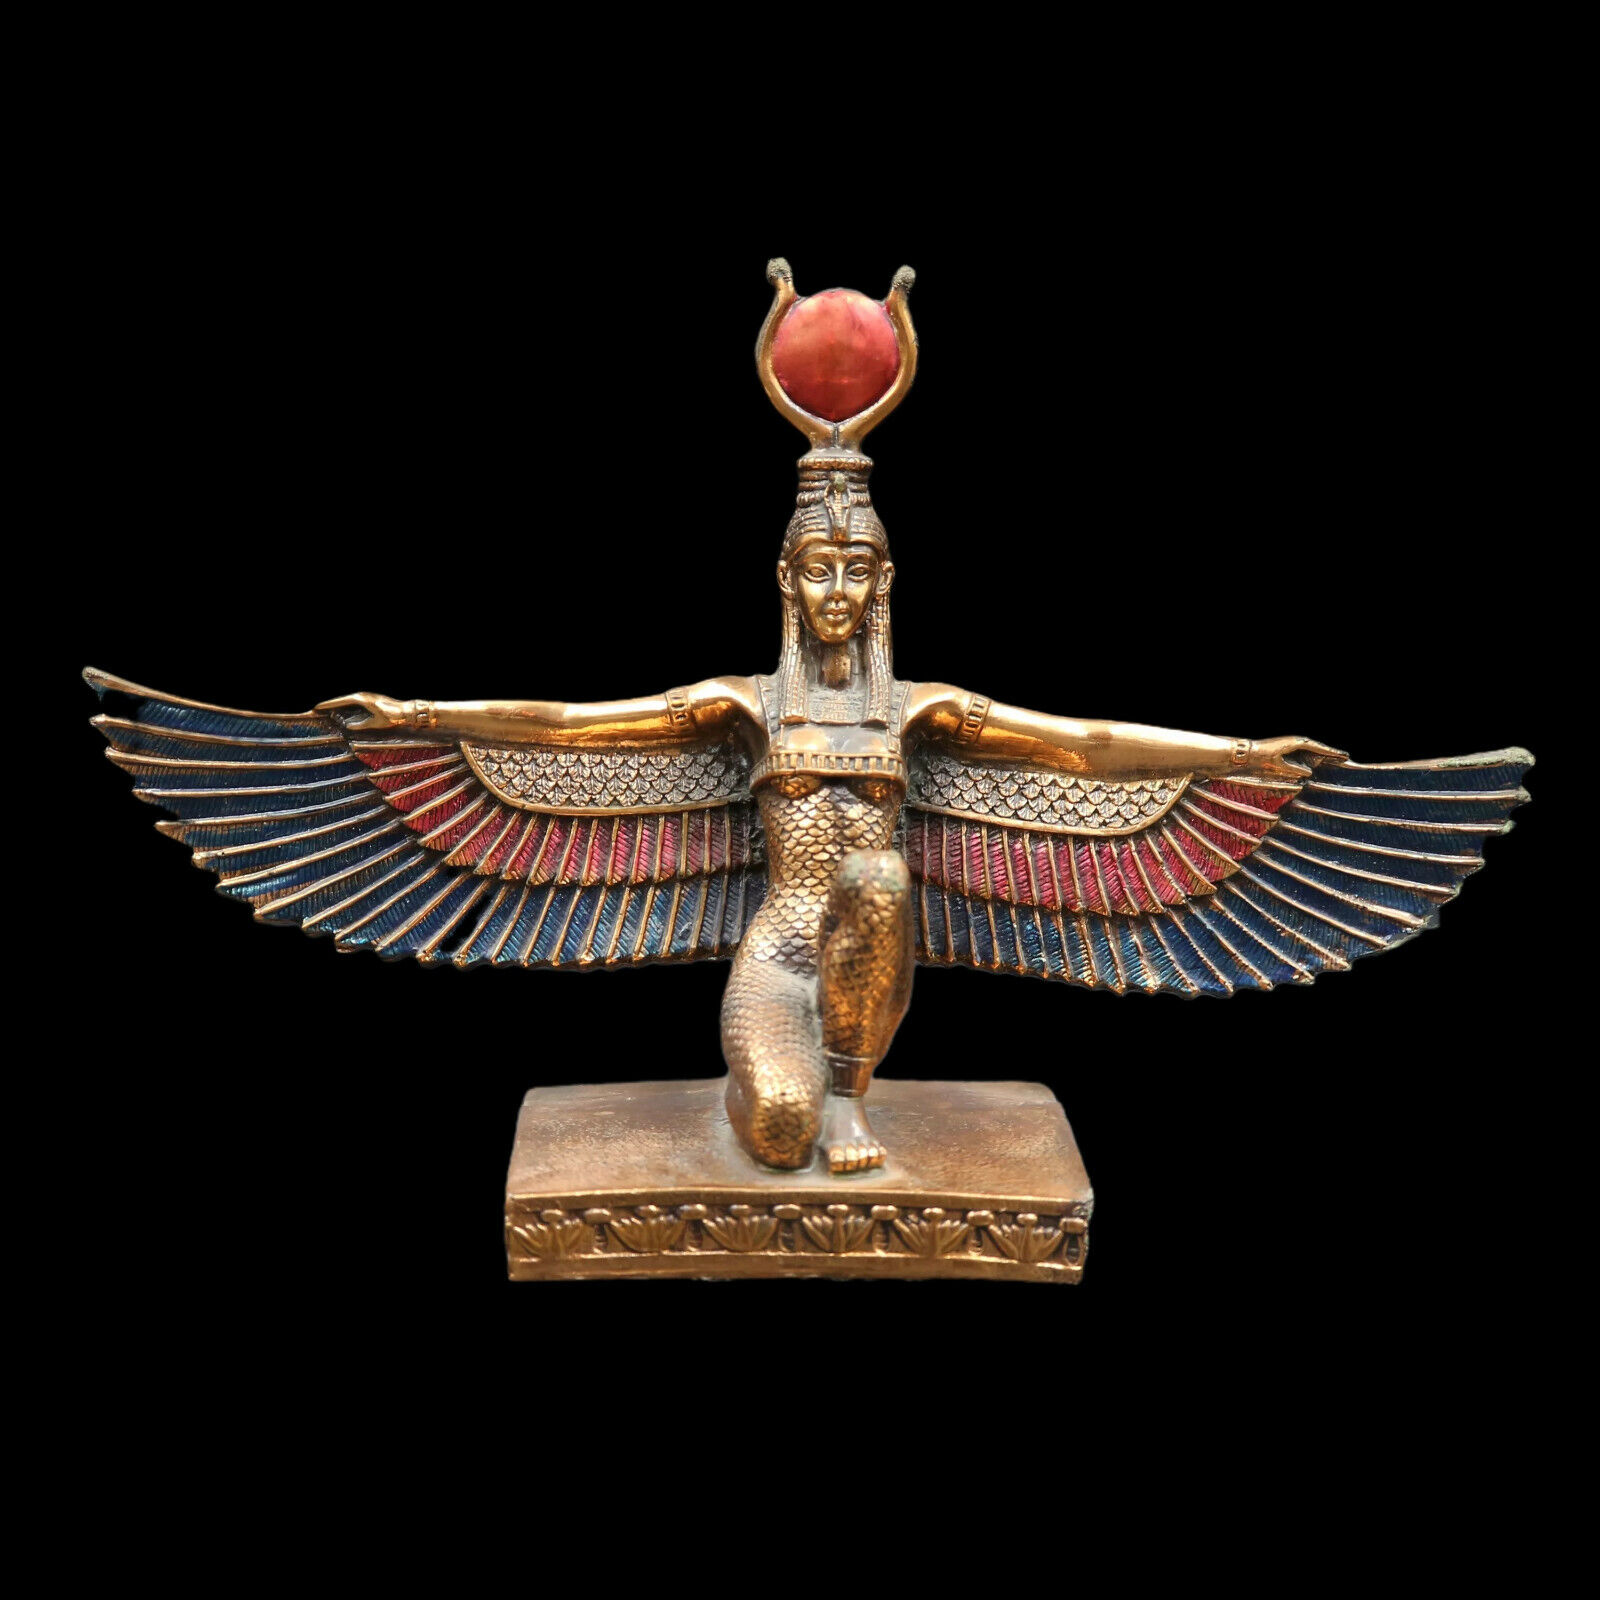 XXX-Large UNIQUE Handmade Egyptian Statue Winged Queen ISIS Goddess of Fertility